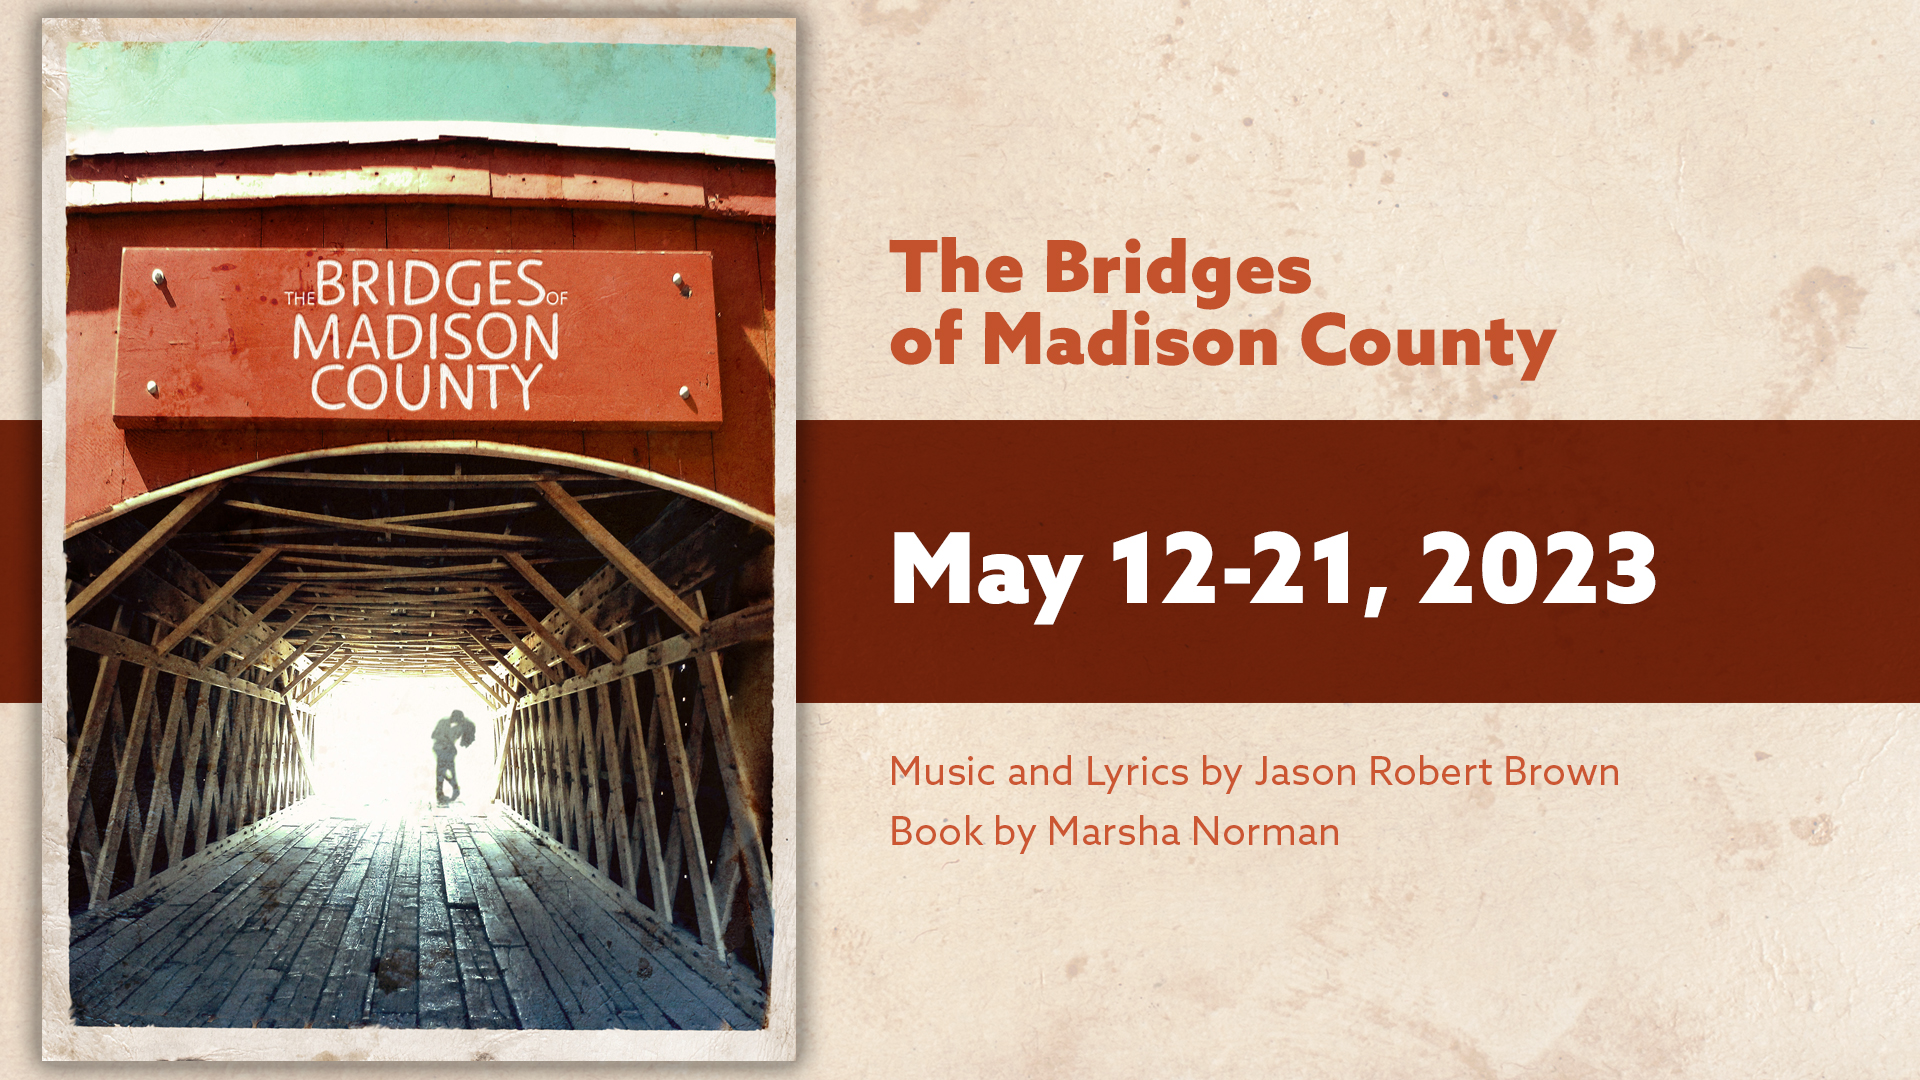 Show Details: The Bridges of Madison County: May 12 - 21, 2023. Music and Lyrics by Jason Robert Brown, Book by Marsha Norman, Artistic Director Temar Underwood